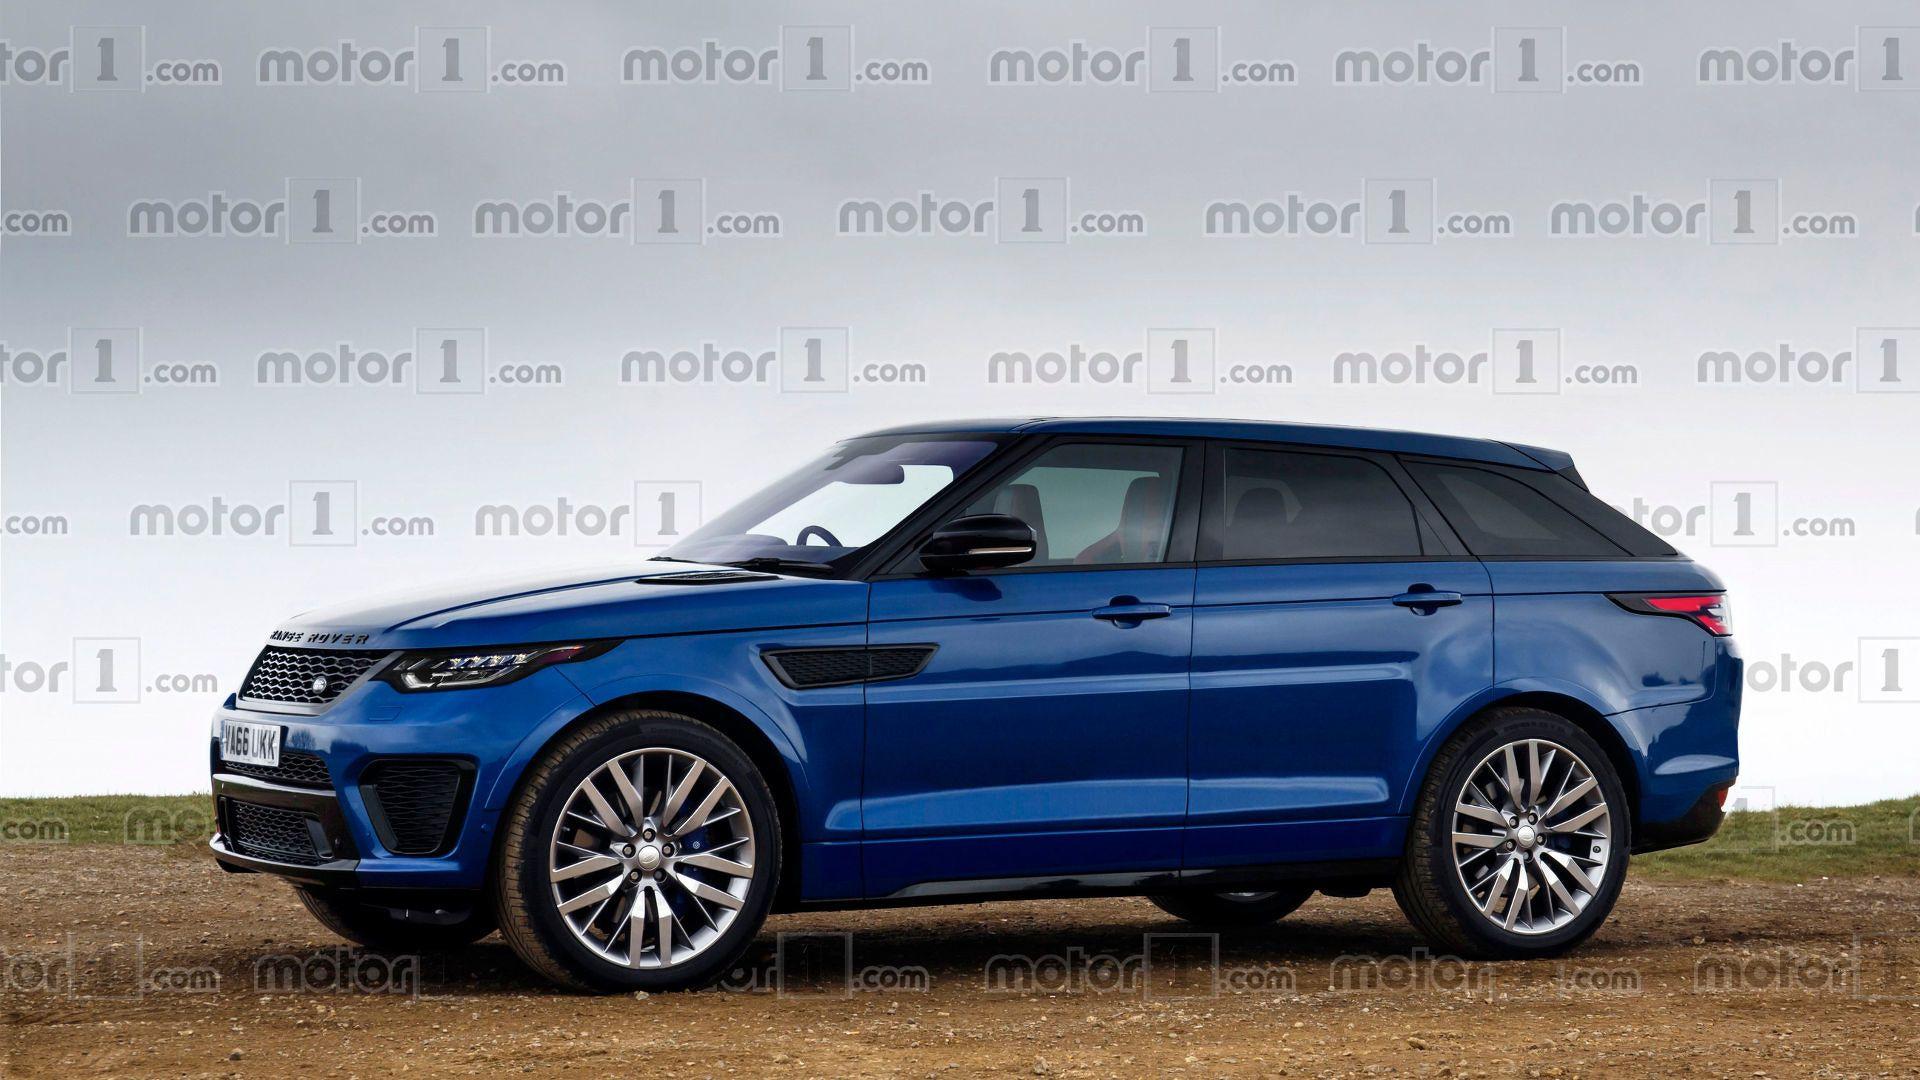 Range Rover Sport Coupe render won't leave you indifferent